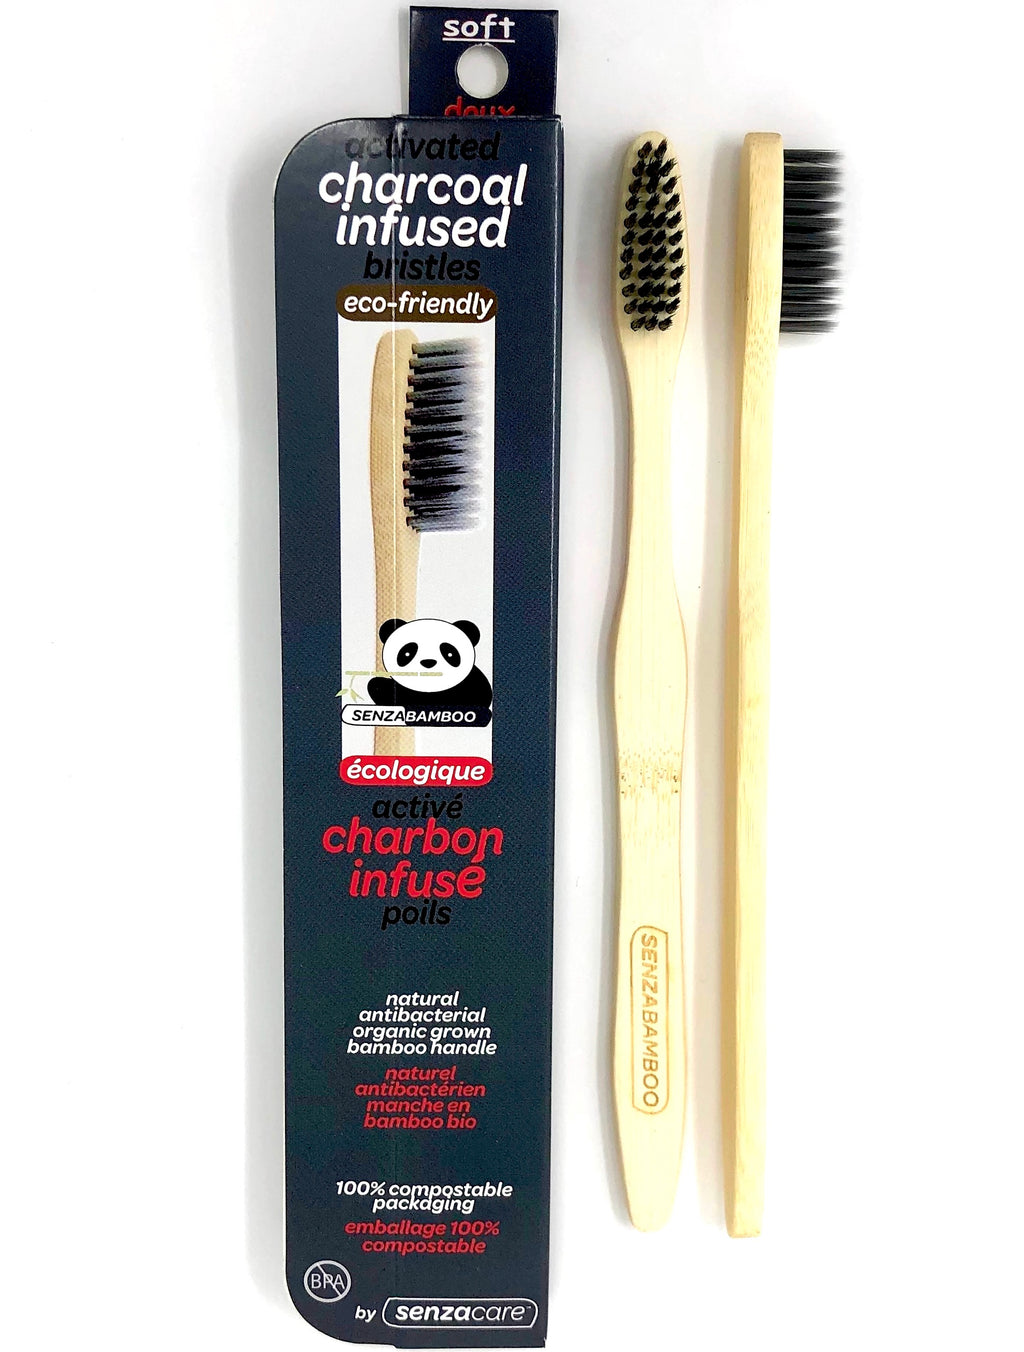 Active Charcoal Infused Thin Tip Bristle Bamboo Toothbrush - Senzacare